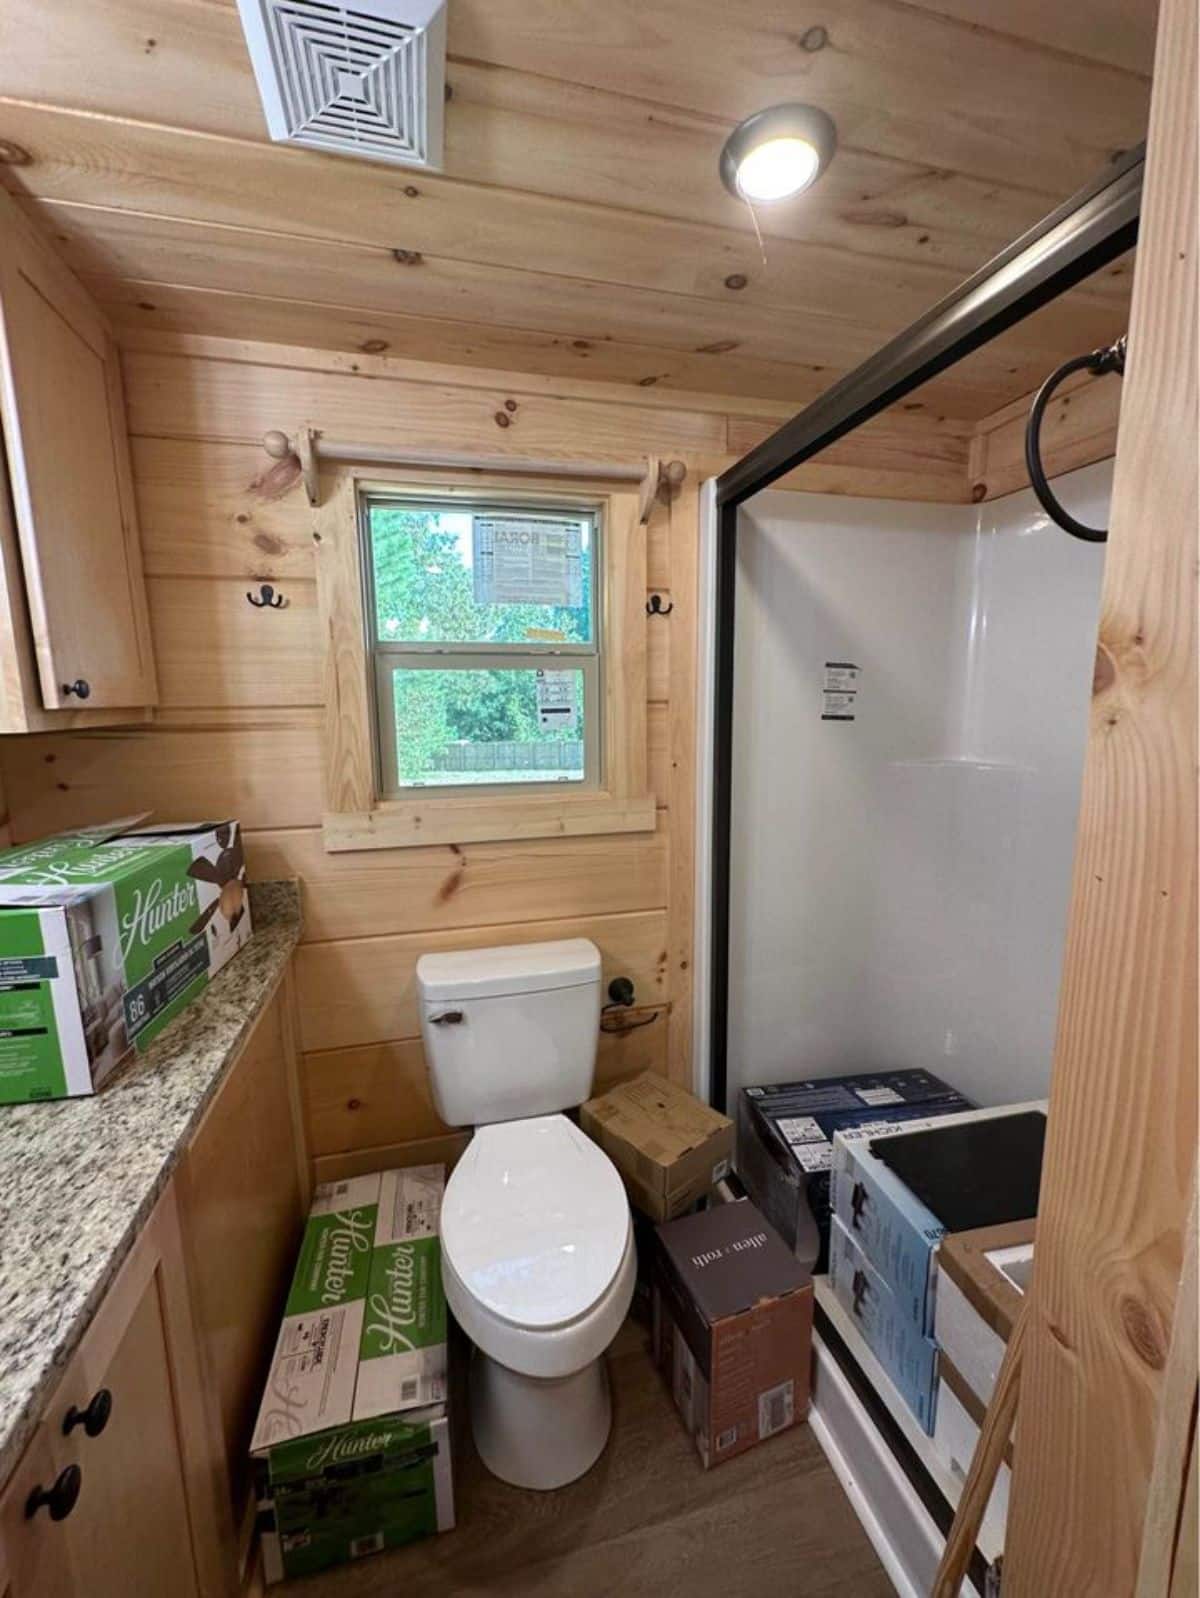 Bathroom of 399-Square Footed Luxury Tiny House has a standard toilet, sink with vanity & mirror  with seperate shower area